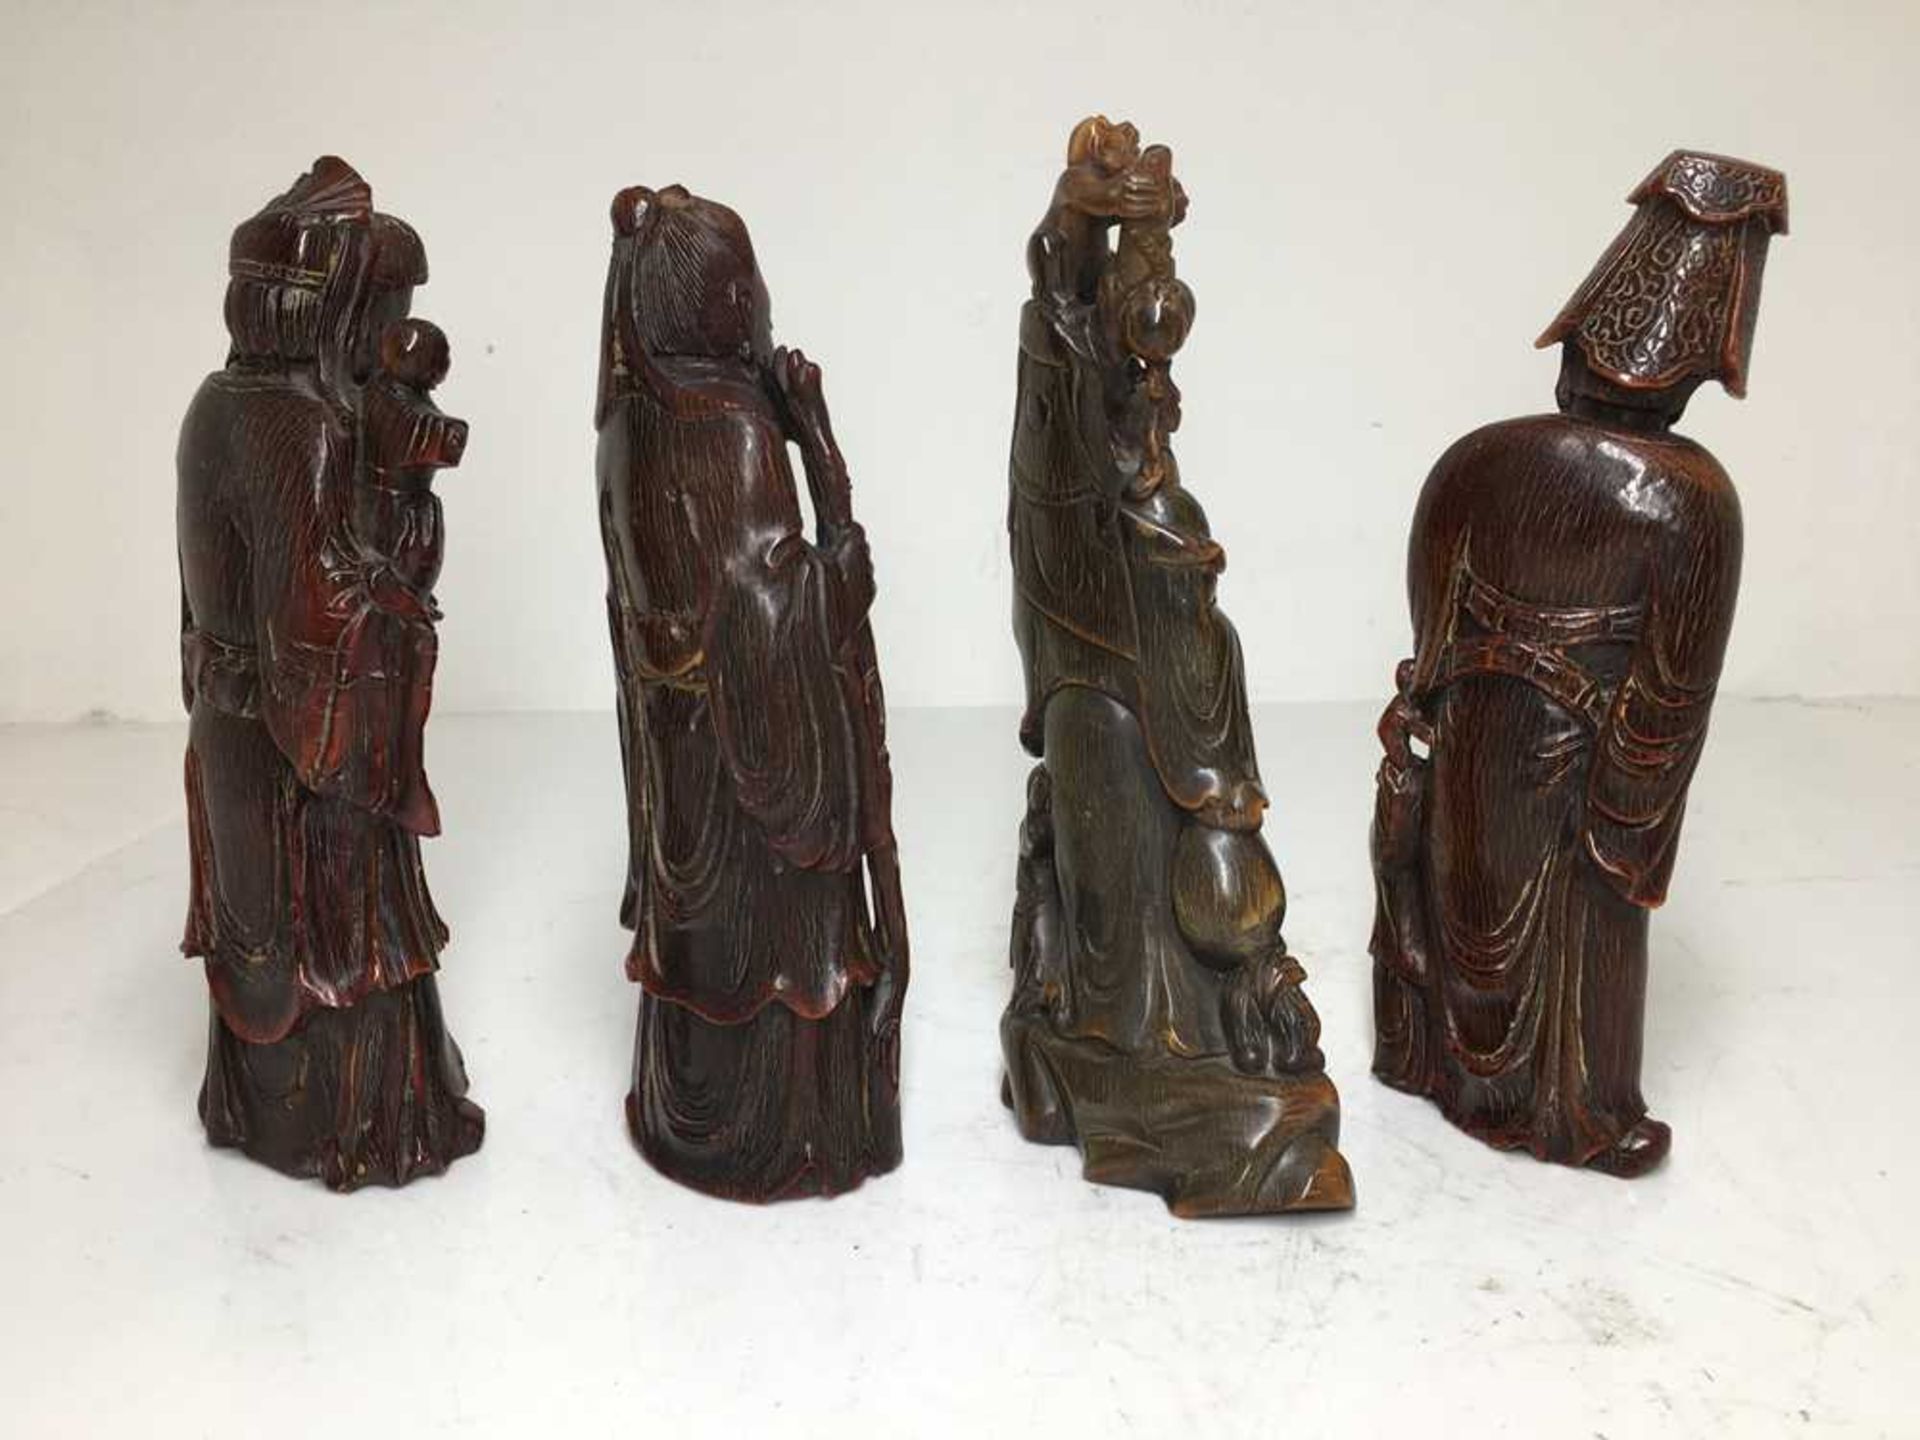 GROUP OF SIX CARVED BUFFALO HORN FIGURES 19TH-20TH CENTURY - Image 13 of 26